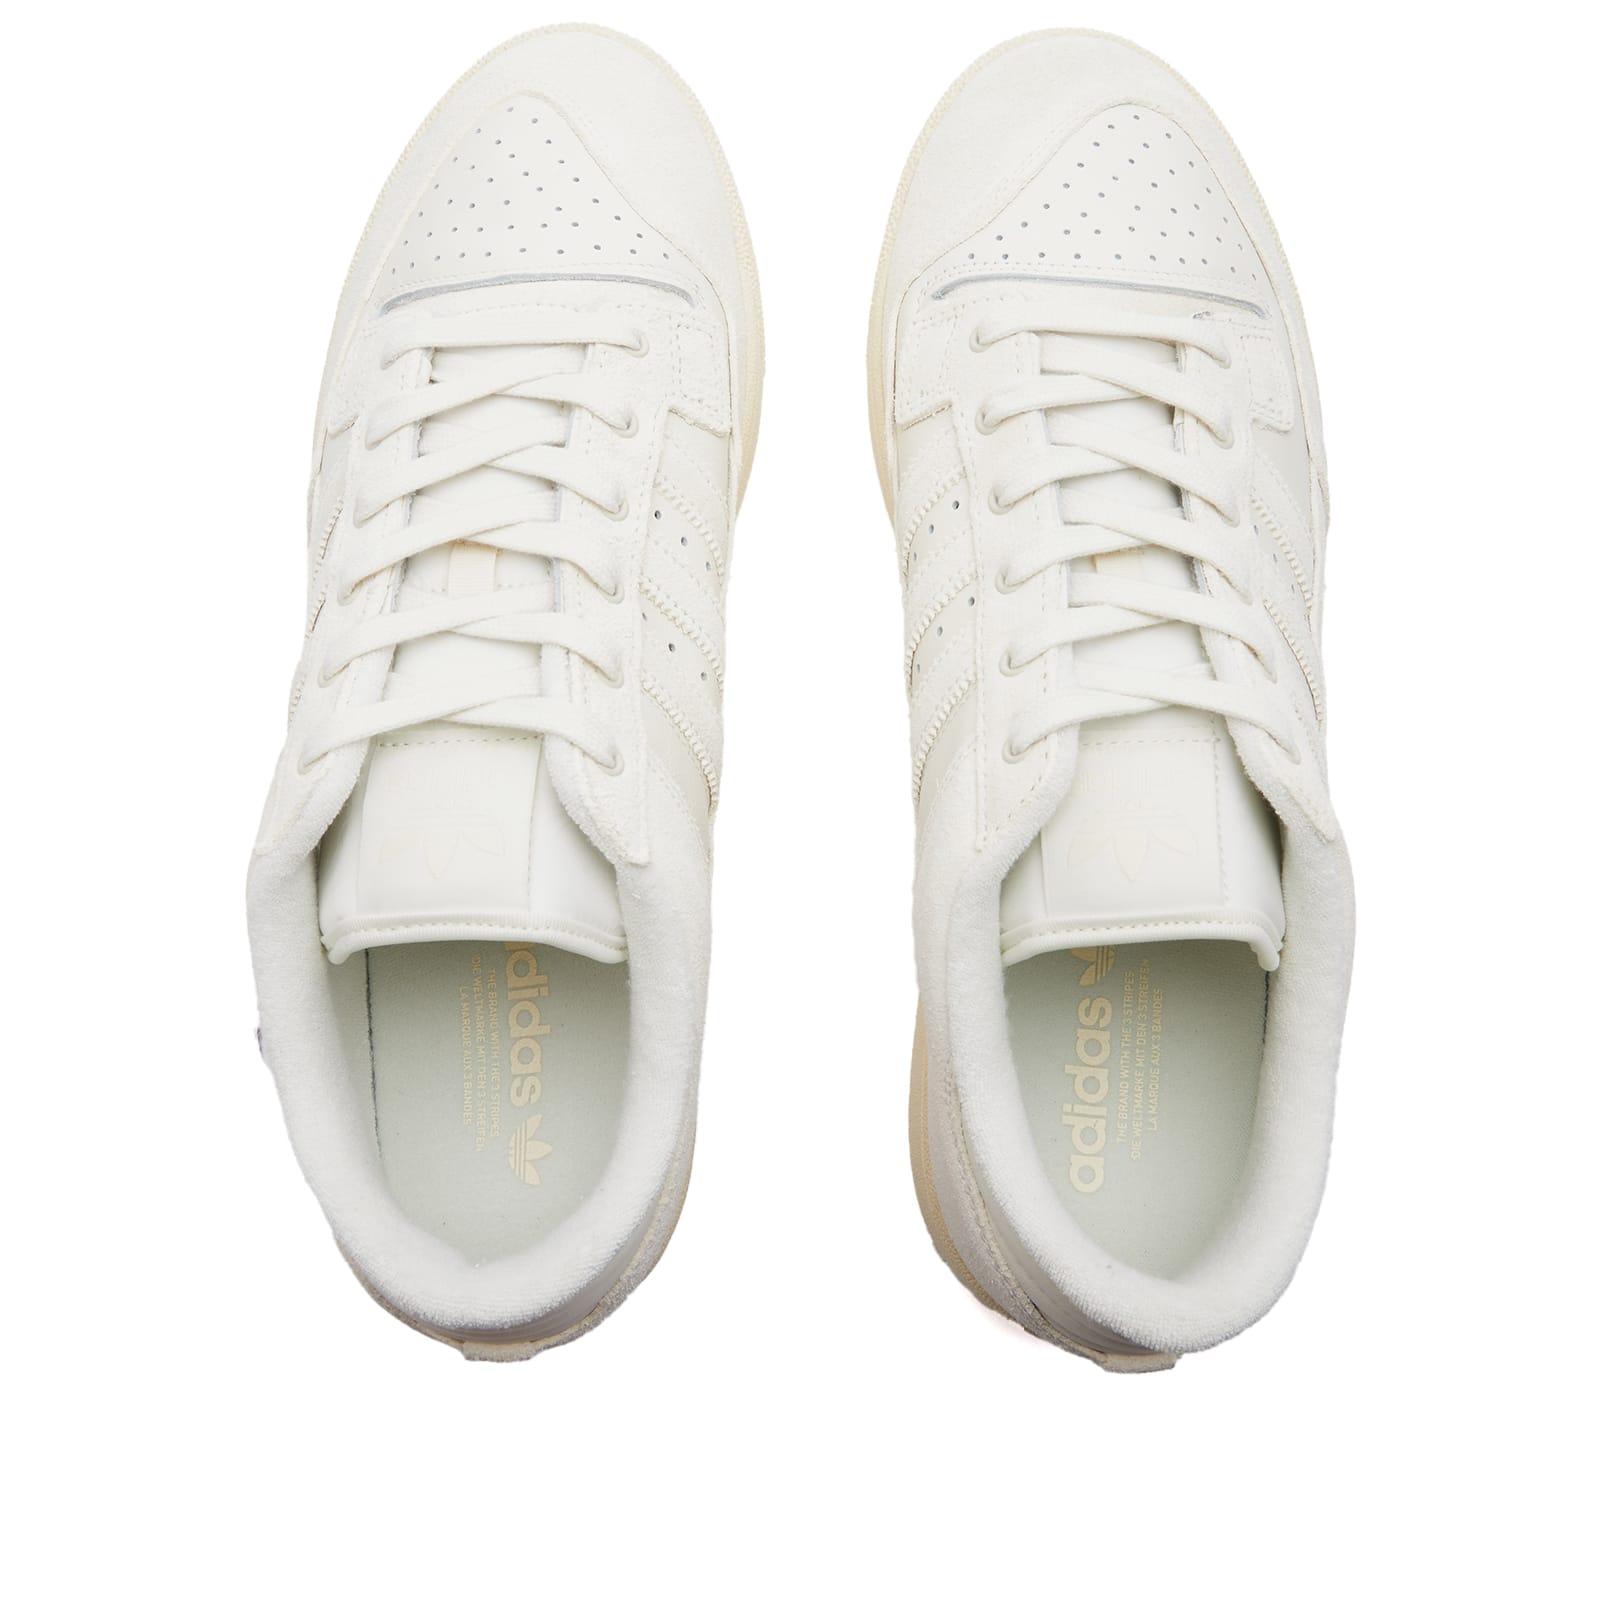 adidas Centennial 85 Lo Sneakers in White | Lyst